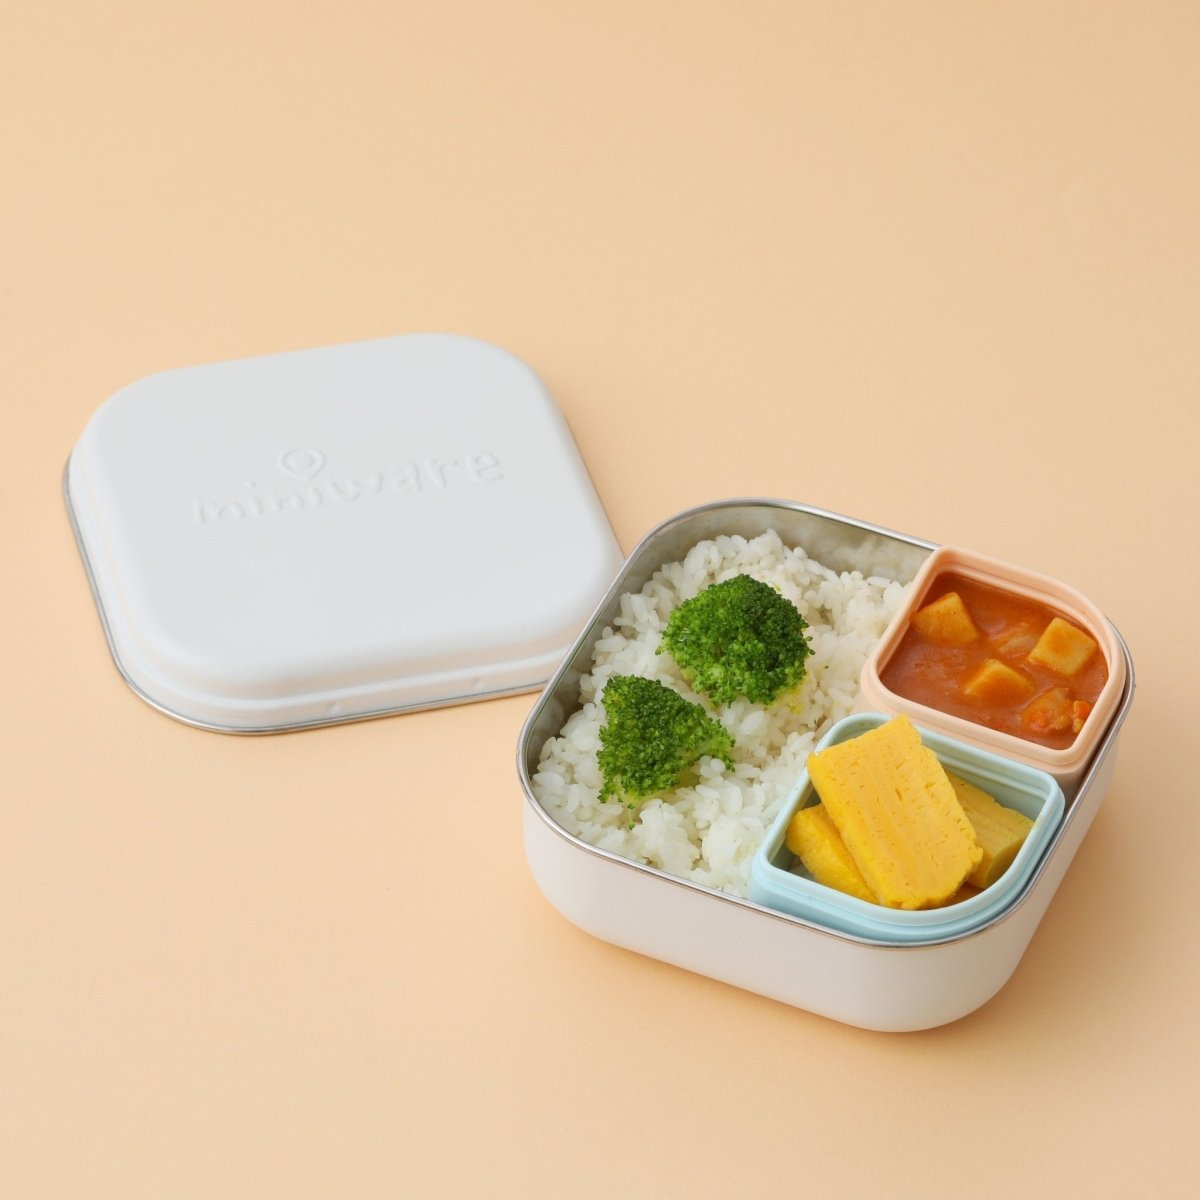 Miniware Grow Bento with 2 silipods Lunch Box- Cotton Candy+Grey - GBC2G